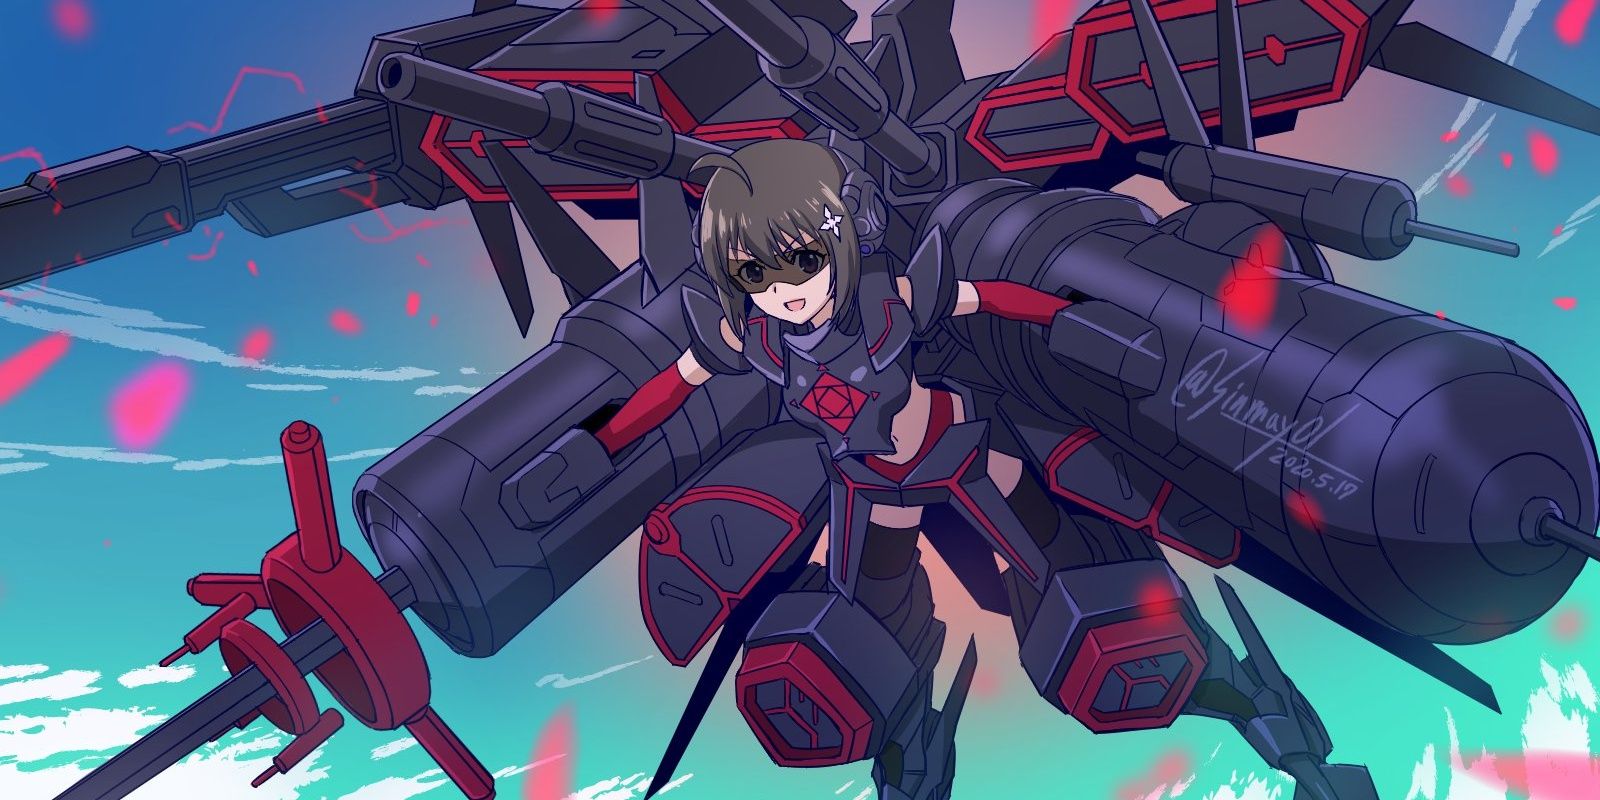 Mapple from Bofuri I Dont Want to Get Hurt, So I'll Max Out My Defense in her mecha.